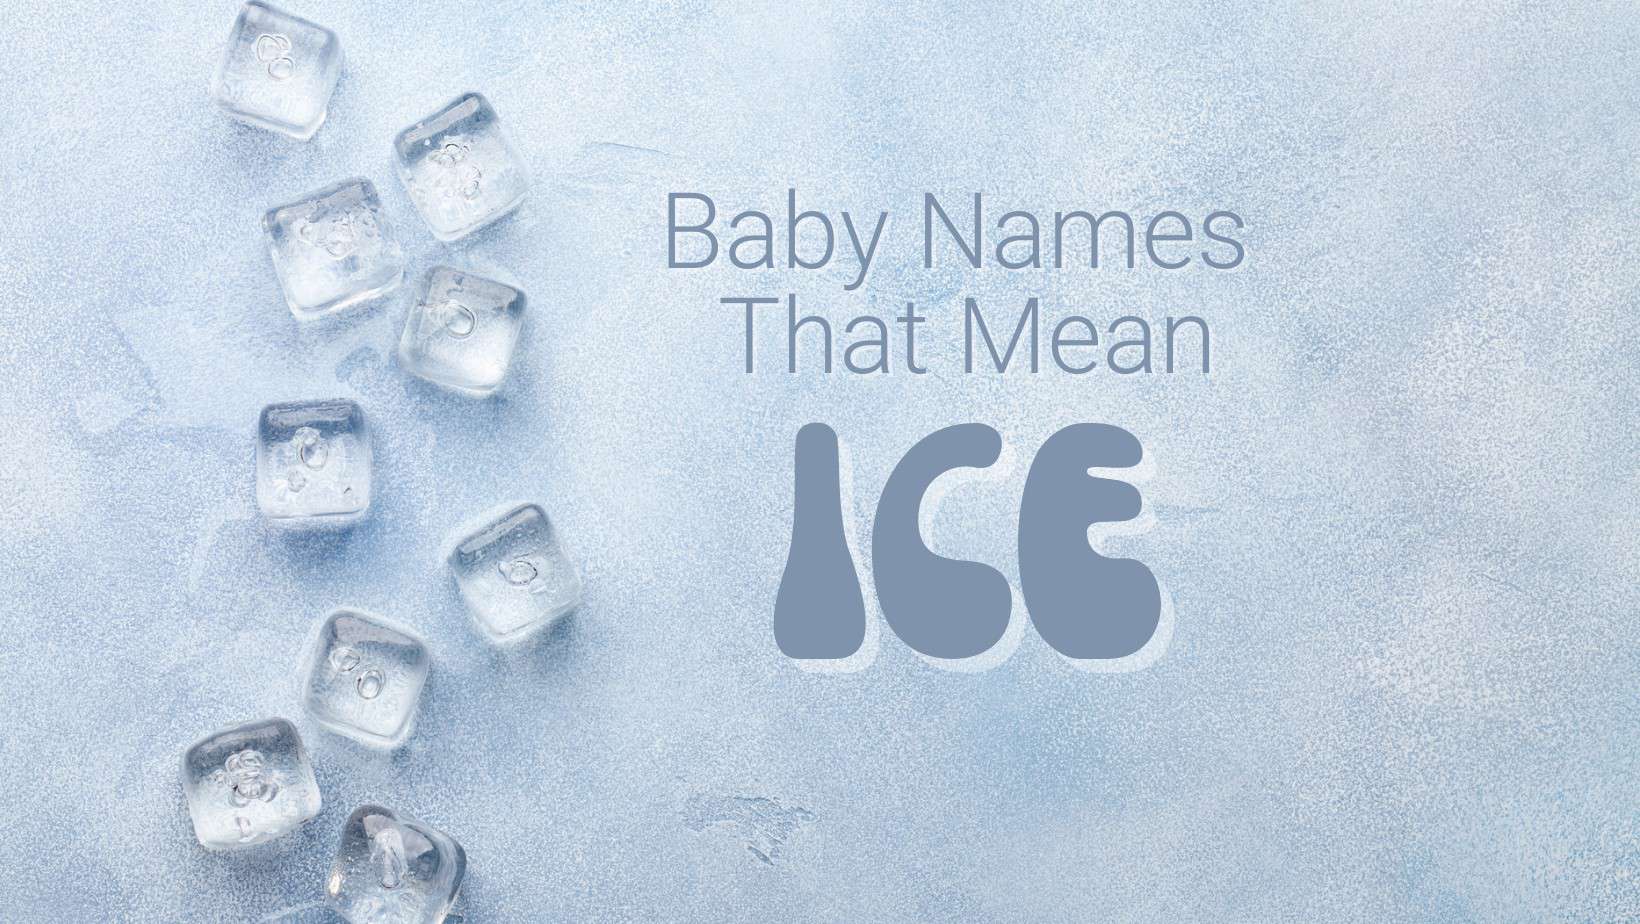 Baby Names That Mean Ice